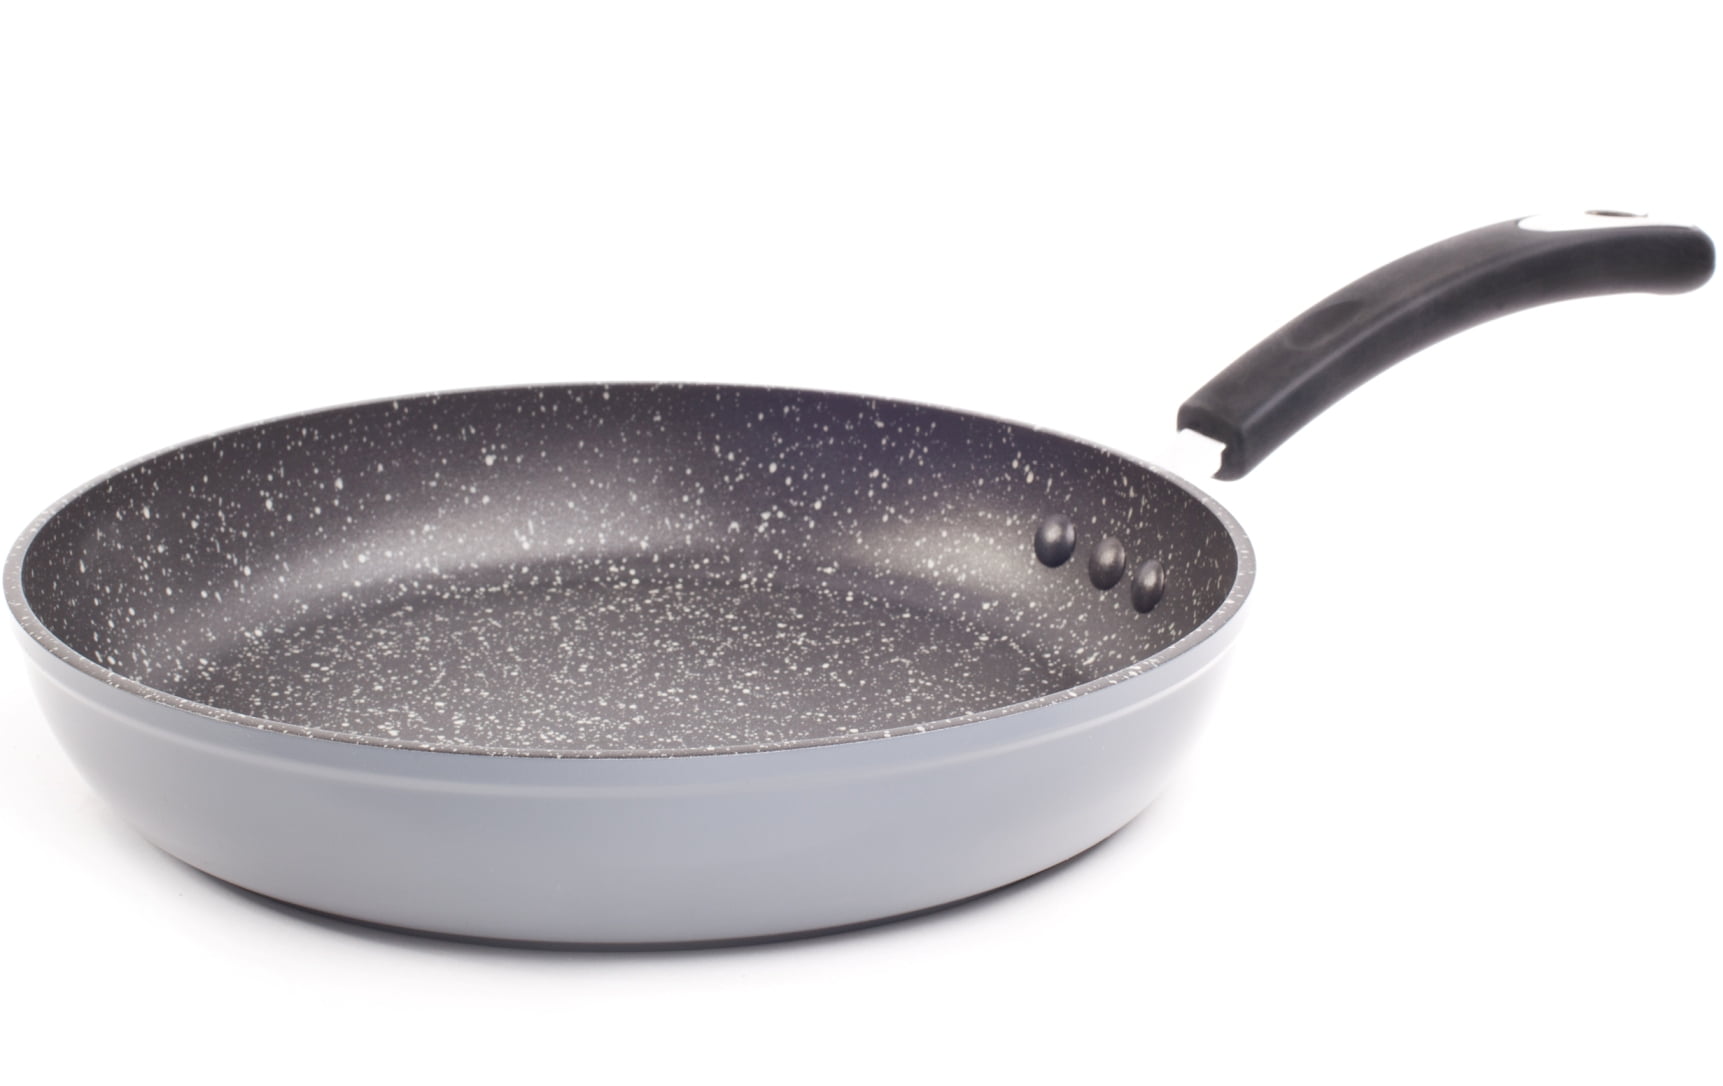 Ozeri 12 Stone Earth Frying Pan with 100% APEO & PFOA-Free Stone-Derived Non-Stick Coating from Germany 